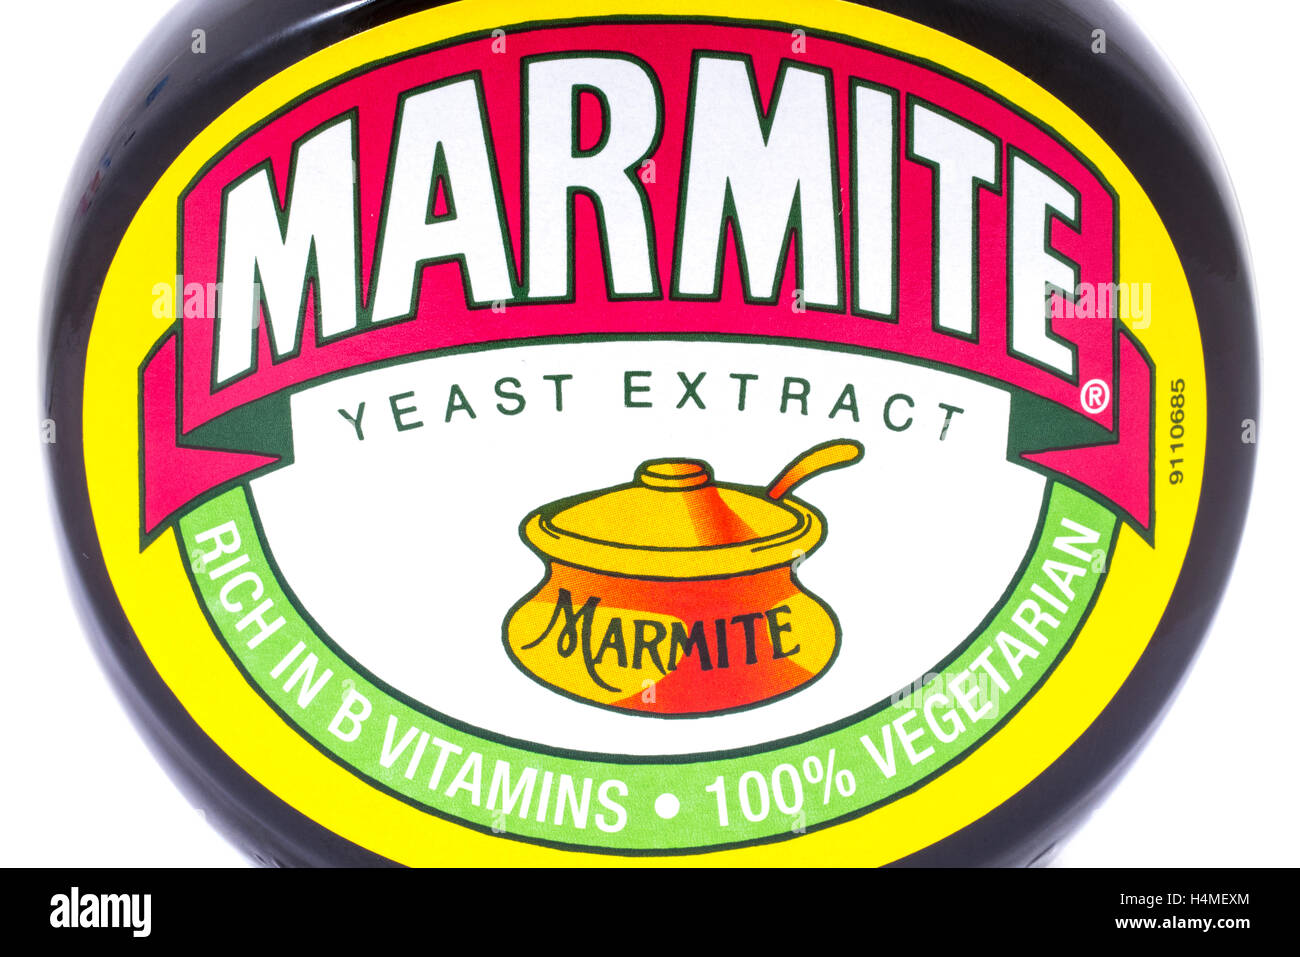 LONDON, UK - OCTOBER 13TH 2016: A shot of the label on a jar of Marmite over a plain white background. Stock Photo